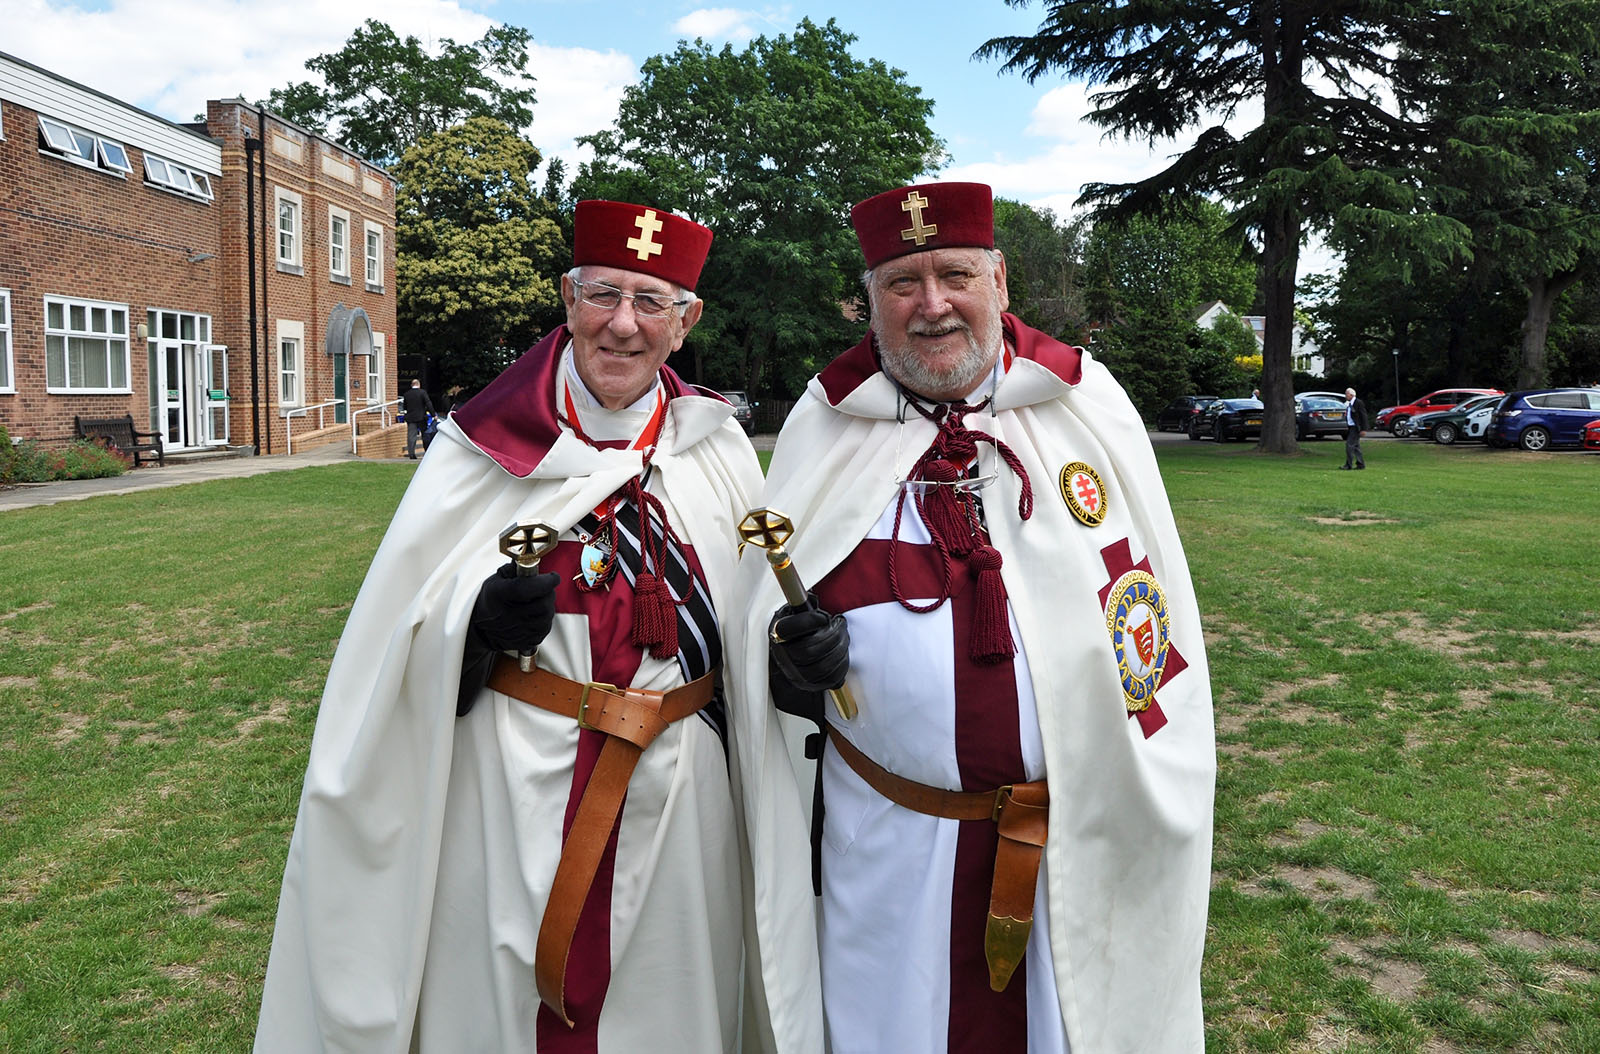 A visit to the Provincial Priory of Middlesex